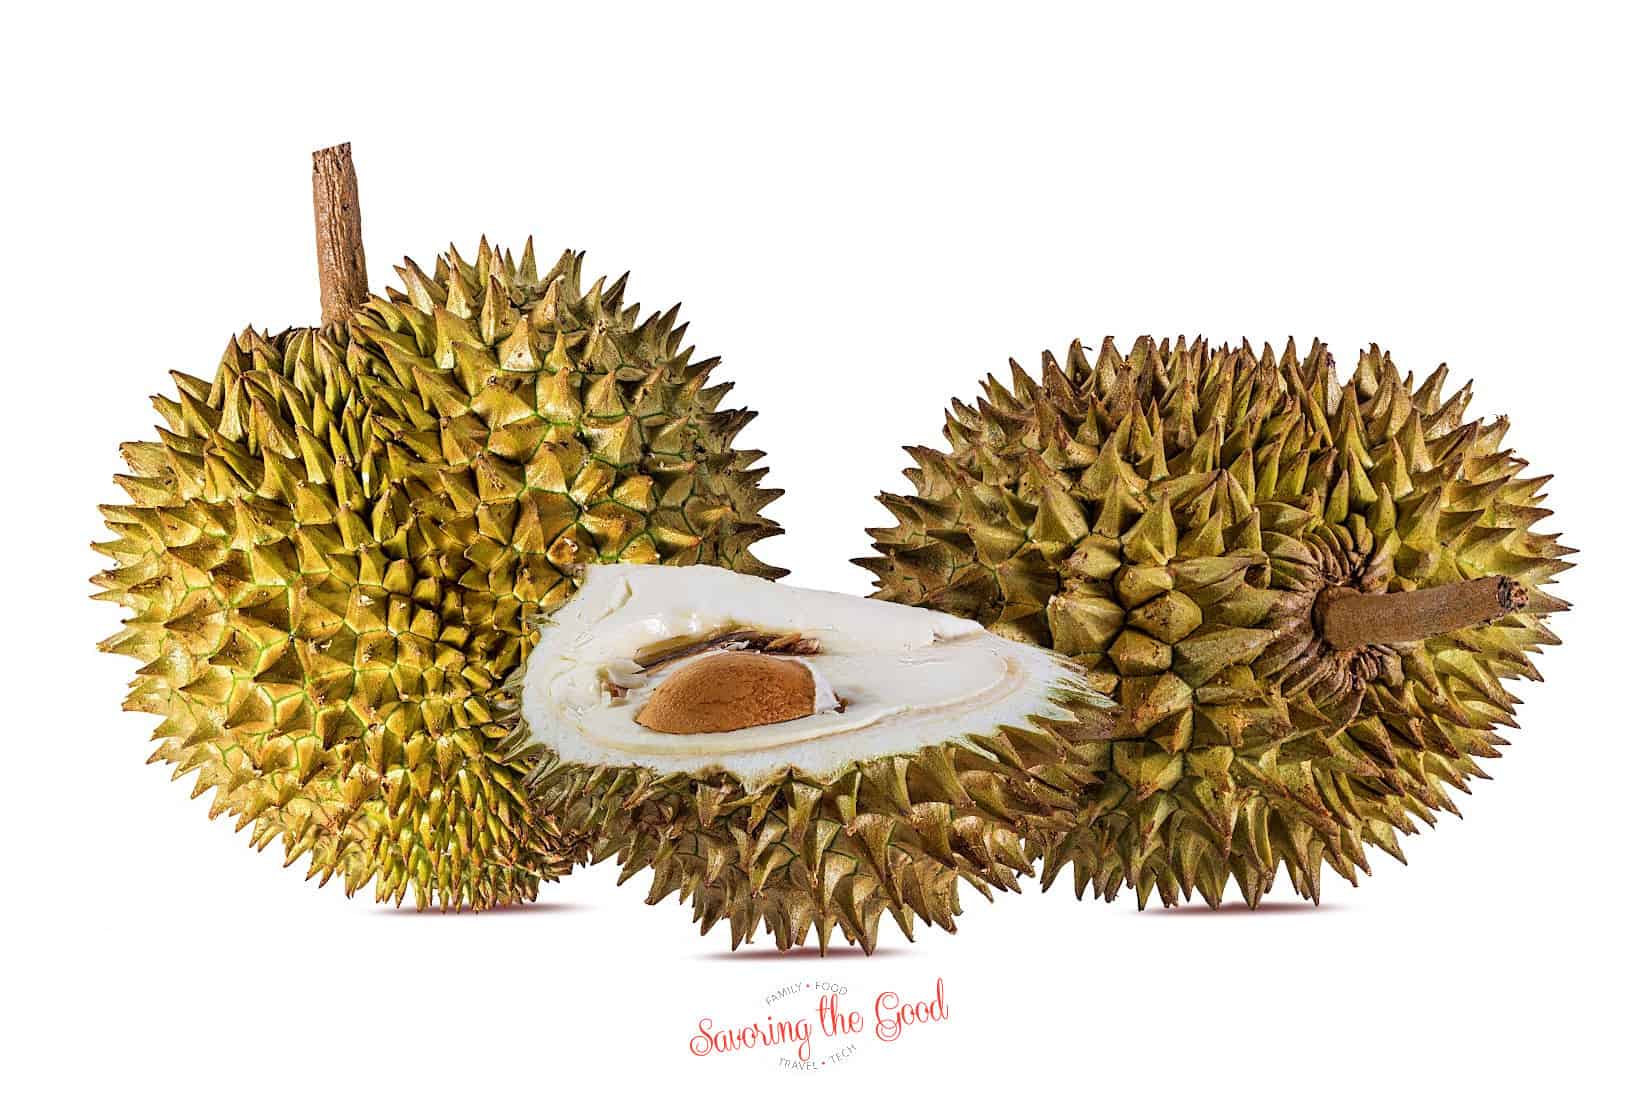 Durian.